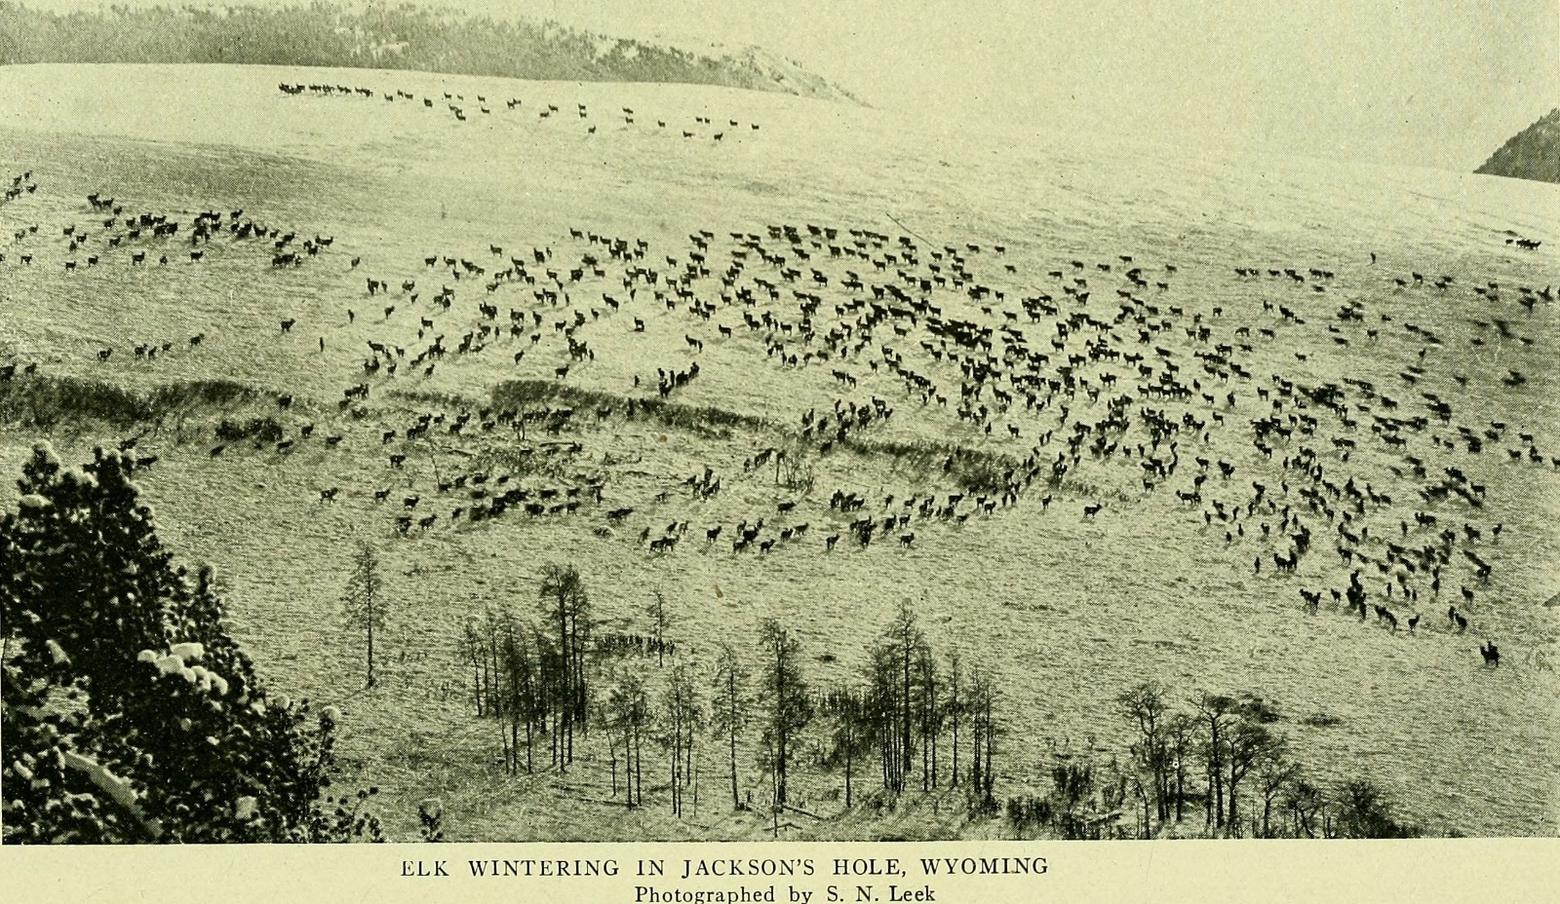 Originally, elk were nourished with supplemental feed at the beginning of the 20th century with the noble intent of saving herds from starvation.  More than a 100 years later,  scientists say such practices of bunching up animals creates ripe conditions for outbreaks of disease like brucellosis, deadly Chronic Wasting Disease and bovine tuberculosis